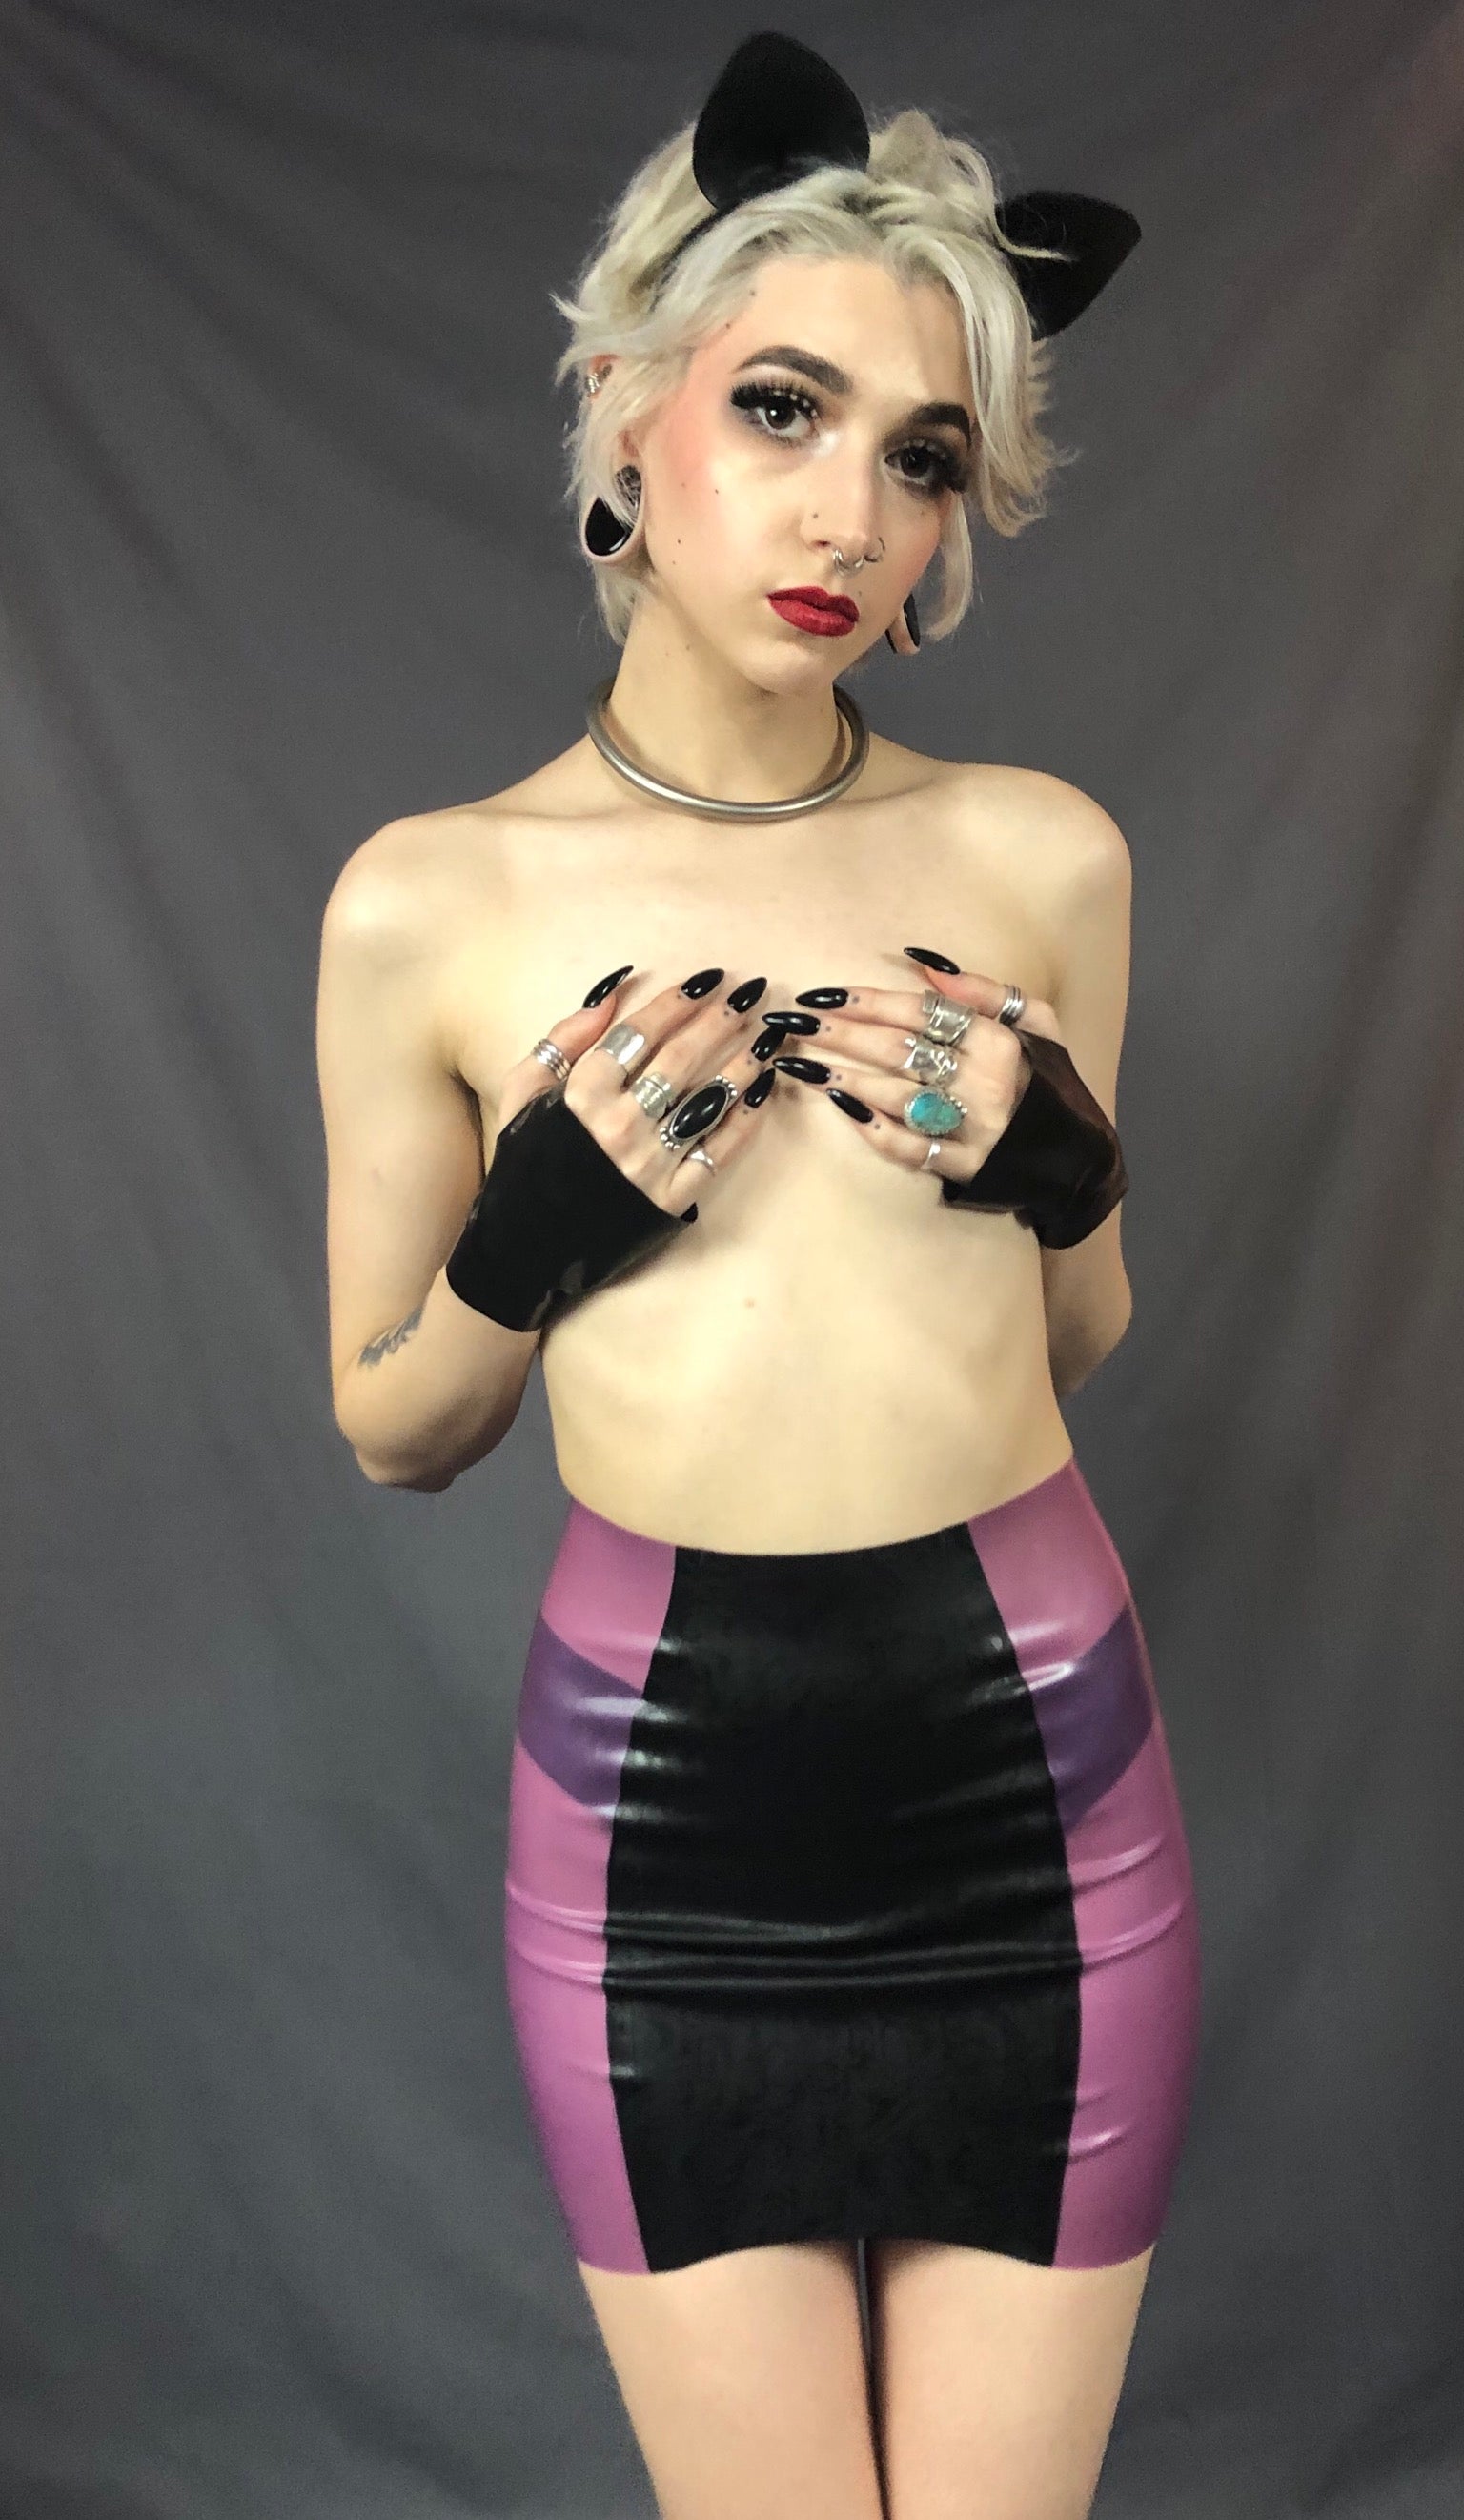 A feminine model wearing cat ears, holding black latex gloved hands over their breasts and showing the front of the black and magenta Latex Girdle Mini Skirt.